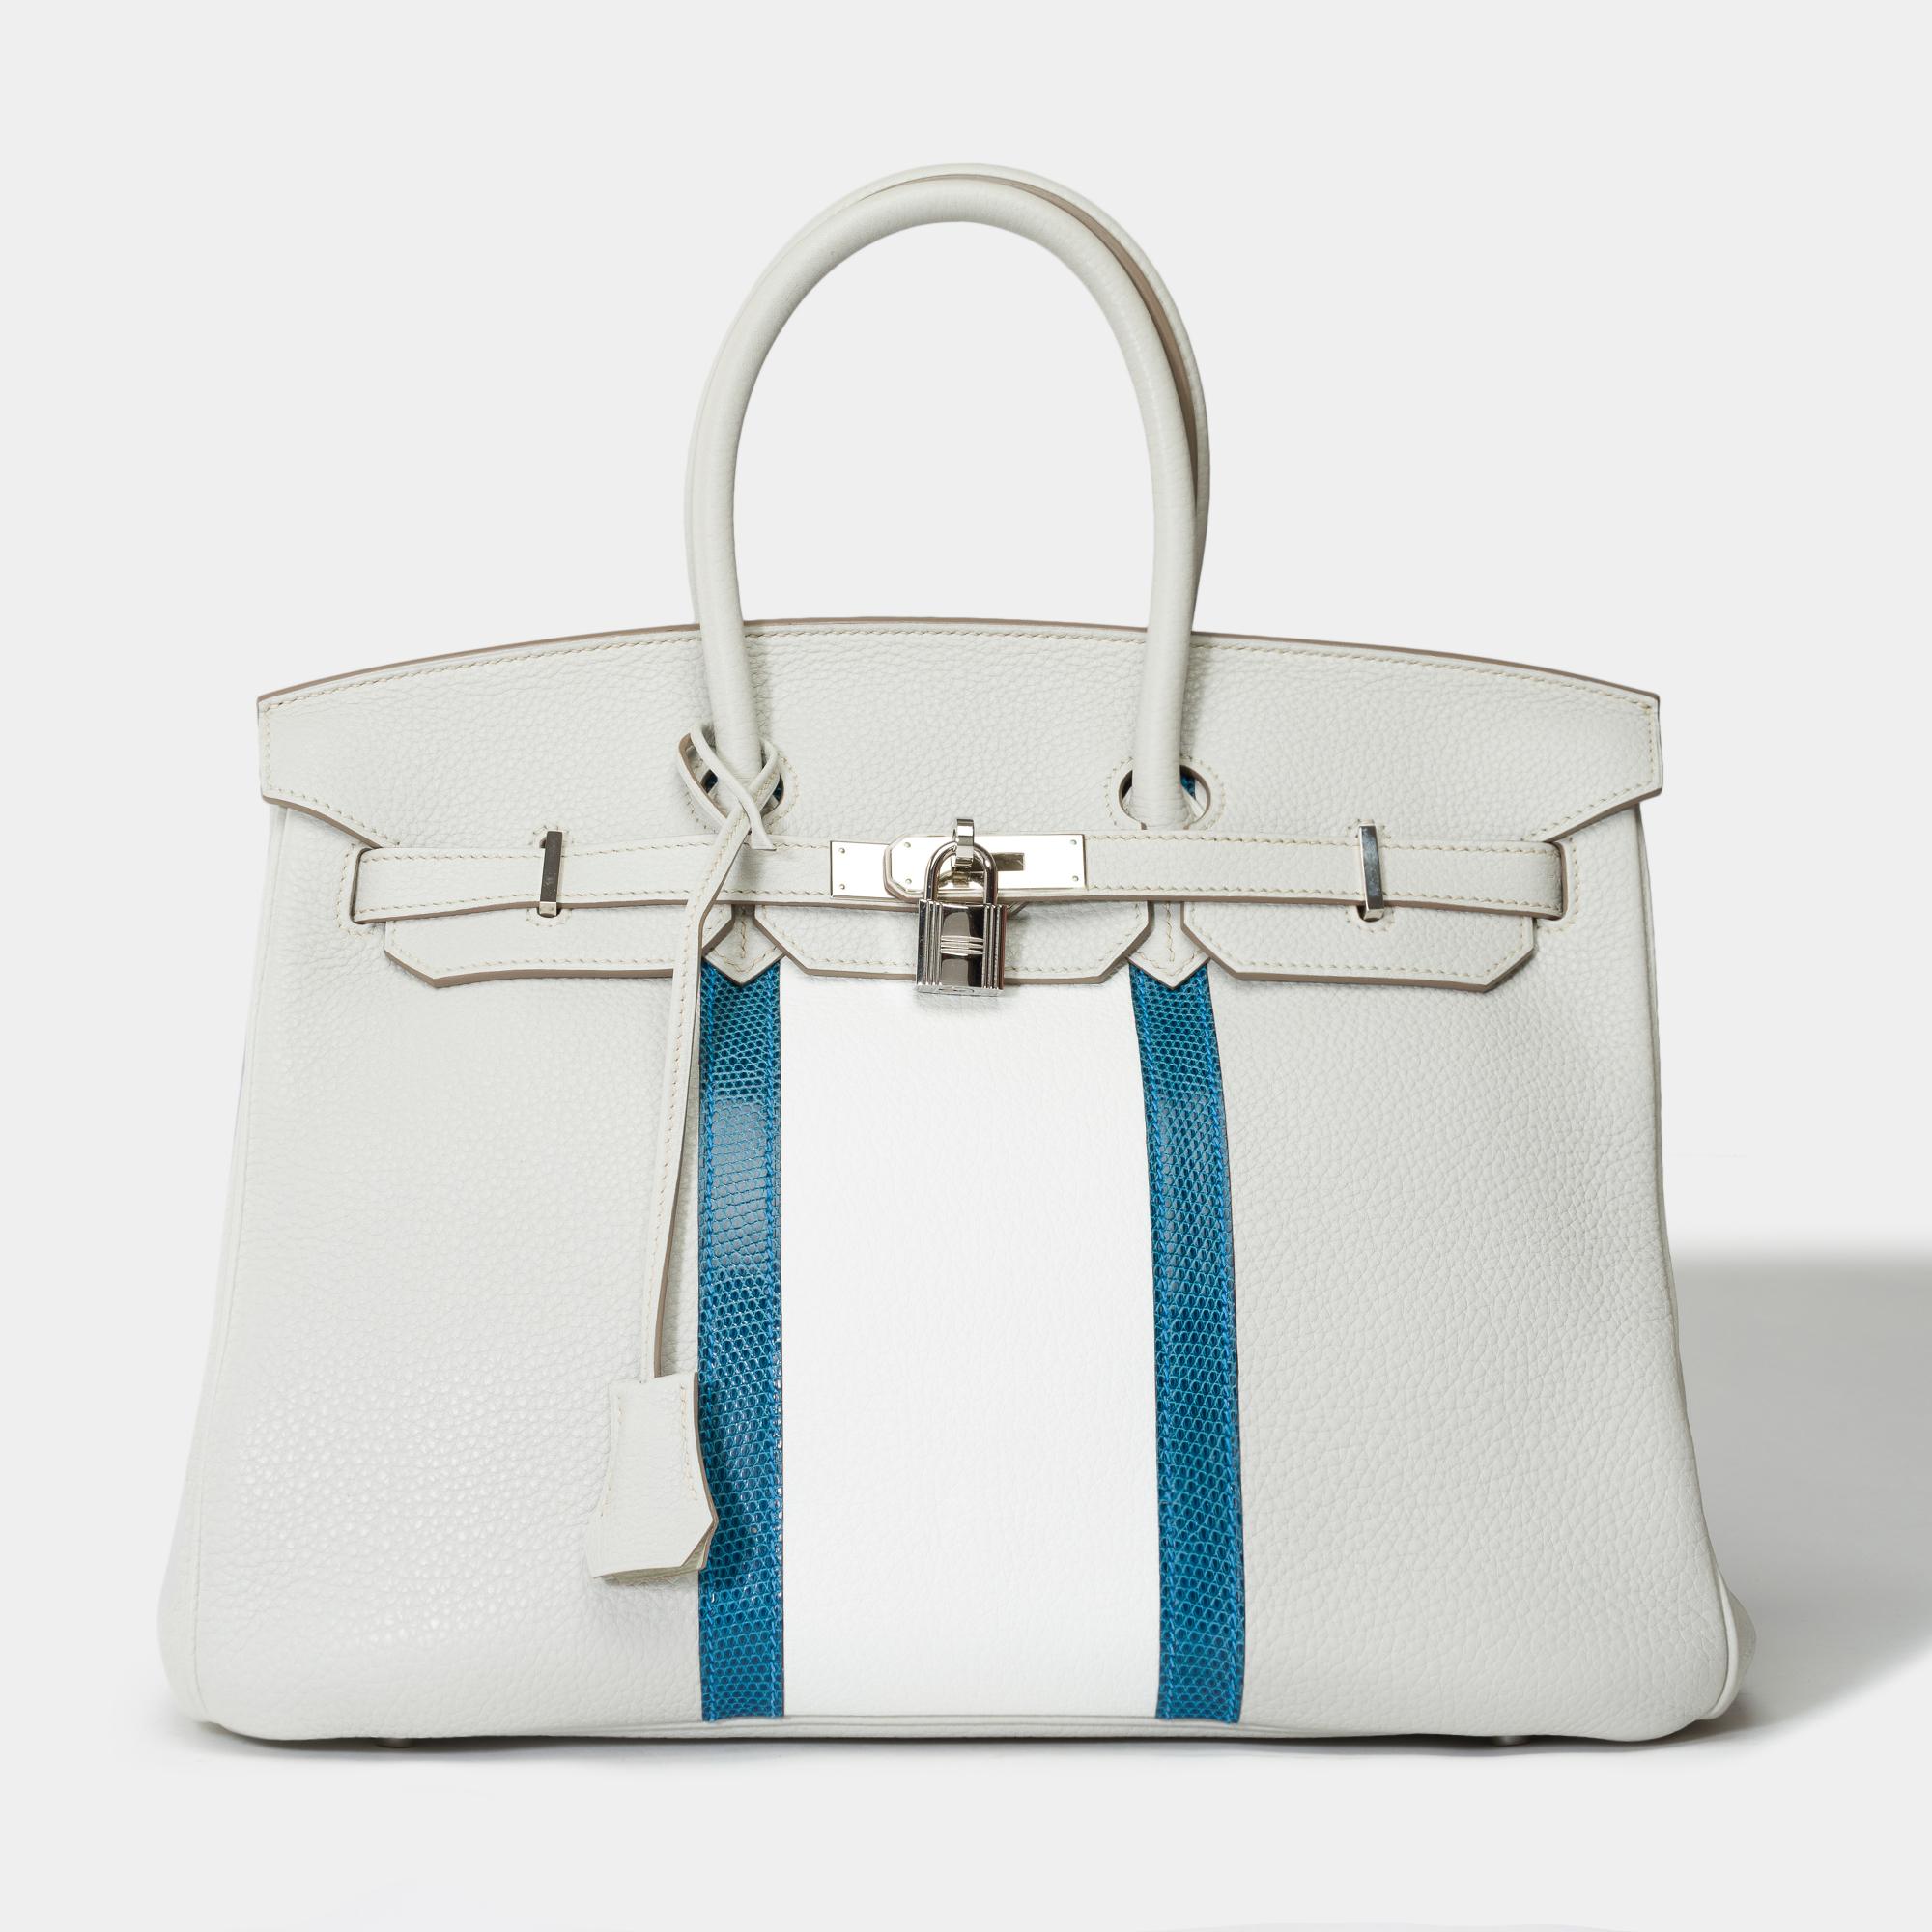 Rare Hermès Birkin Club 35 handbag in grey, white leather and blue lizard, SHW In Excellent Condition For Sale In Paris, IDF